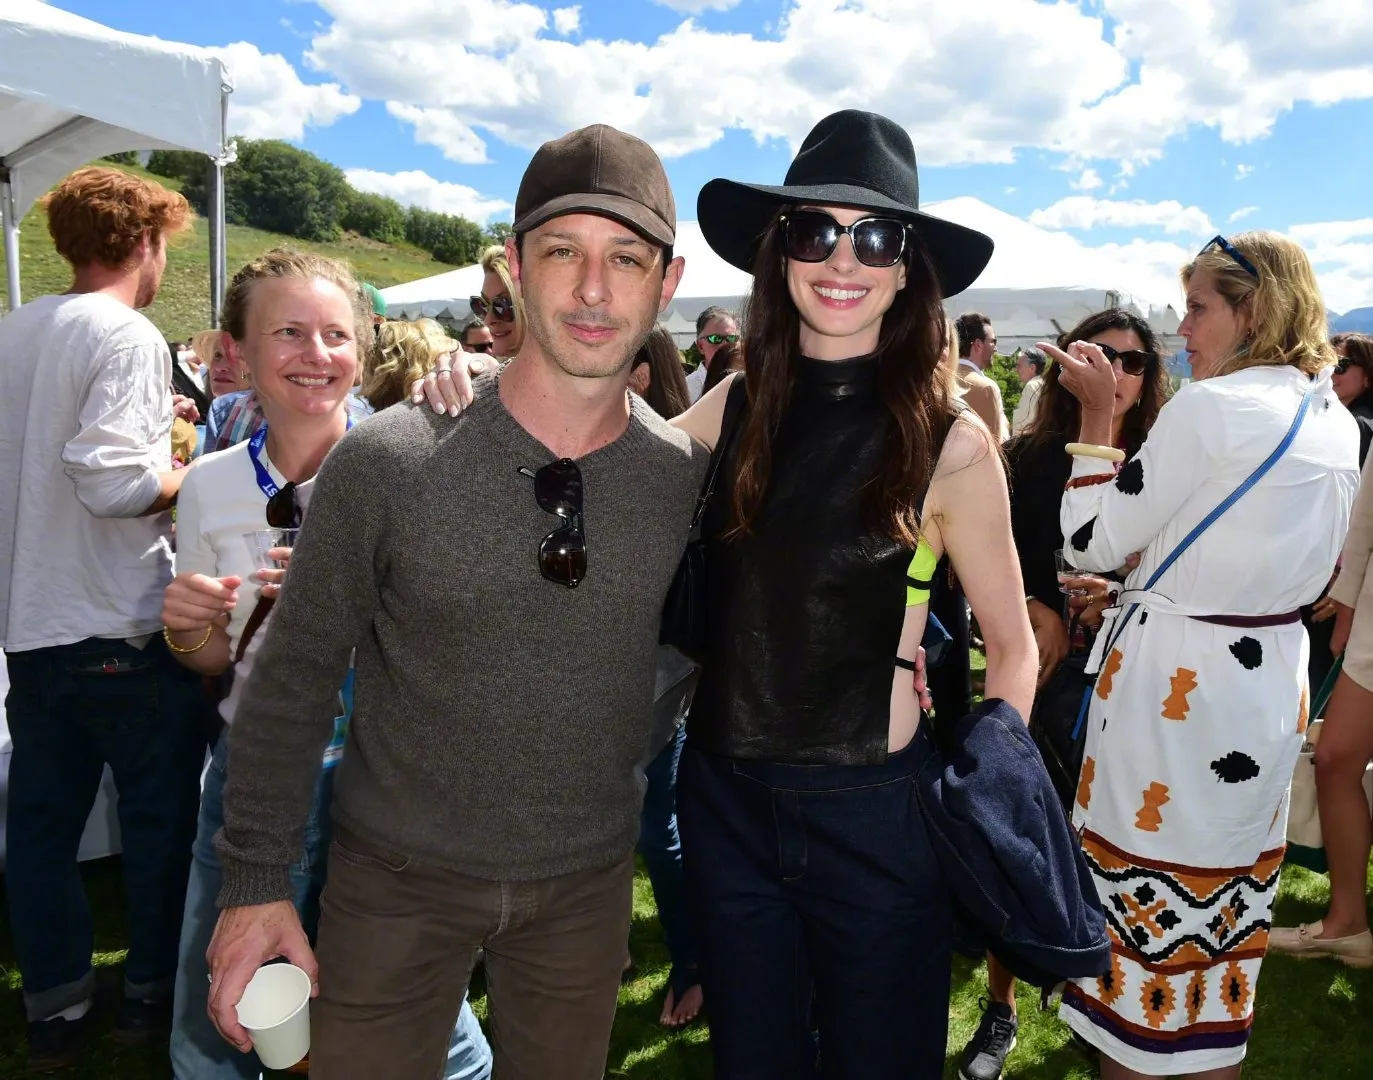 Anne Hathaway Attends Telluride Film Festival to Promote New Film 'Armageddon Time‎' | FMV6